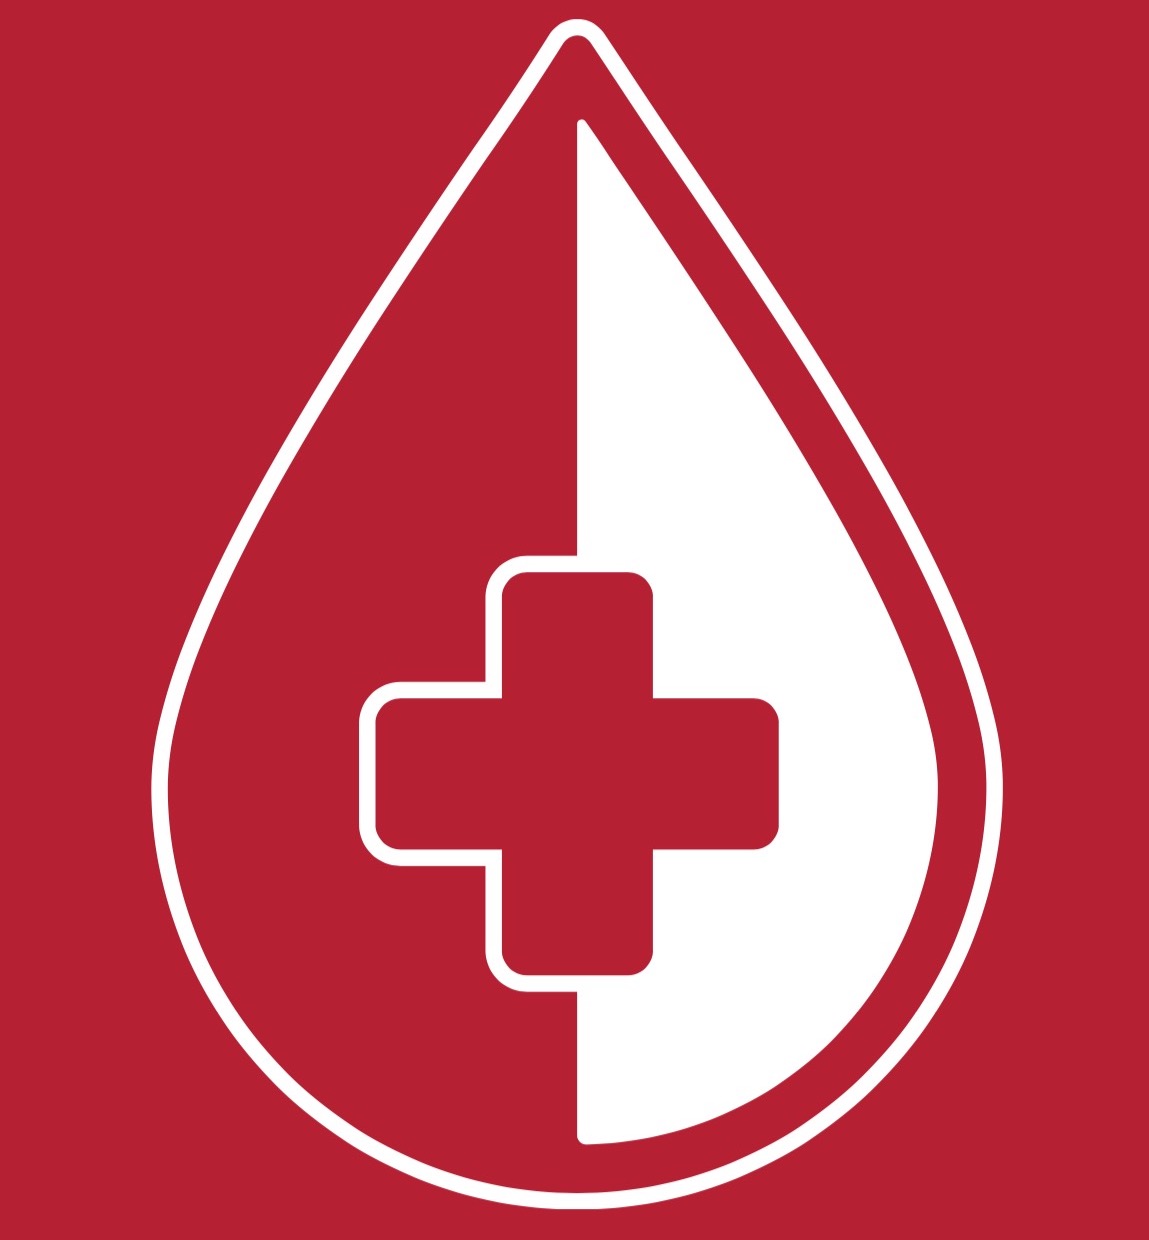 Picture of bleed logo